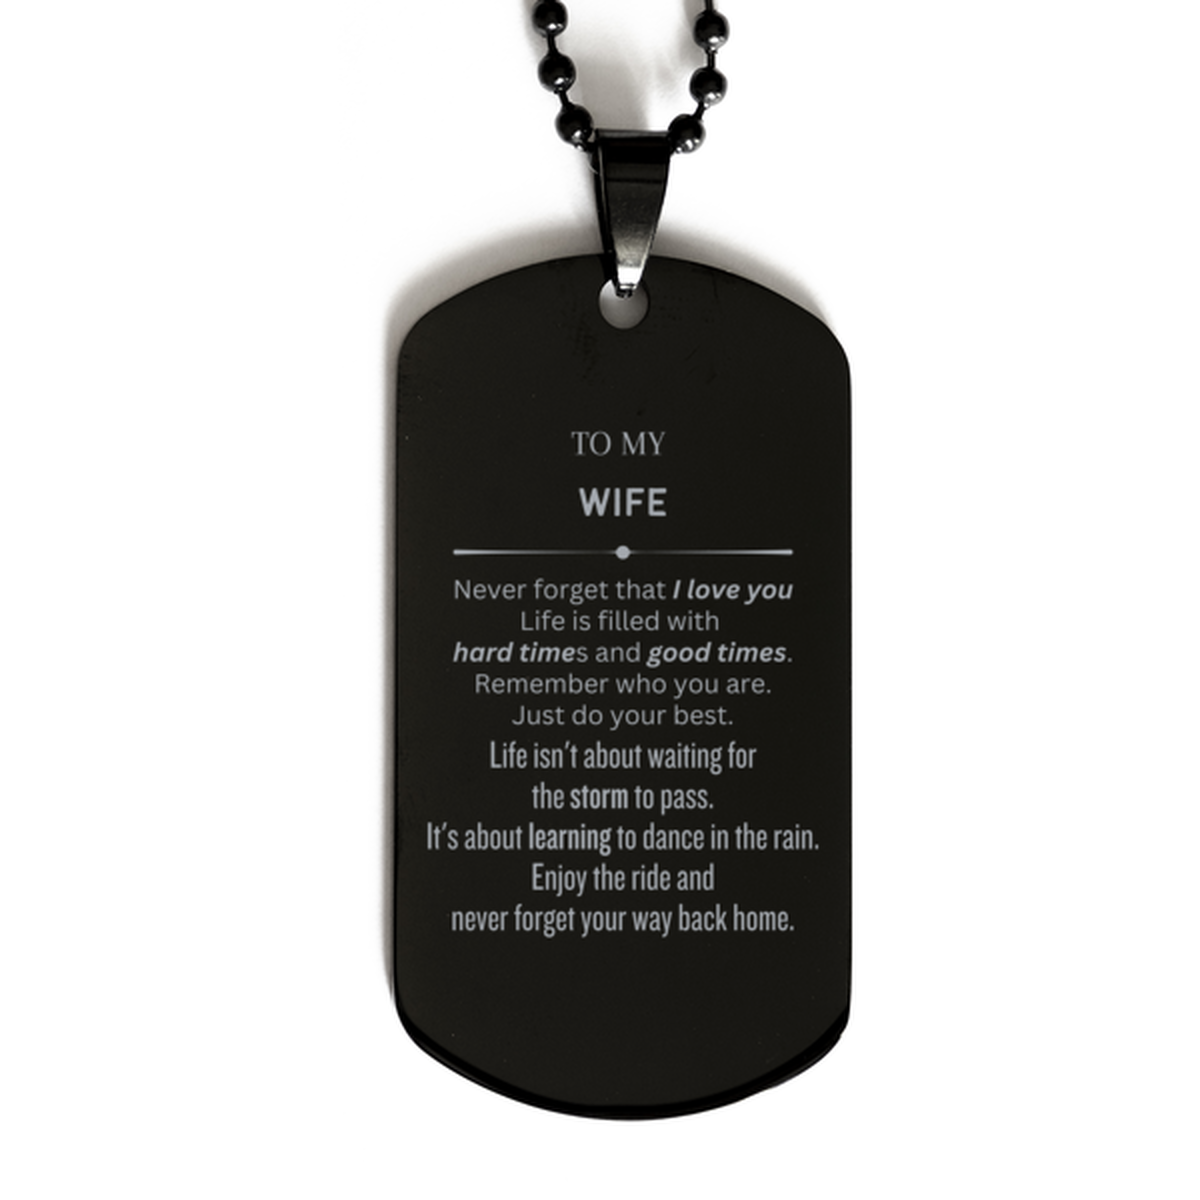 Christmas Wife Black Dog Tag Gifts, To My Wife Birthday Thank You Gifts For Wife, Graduation Unique Gifts For Wife To My Wife Never forget that I love you life is filled with hard times and good times. Remember who you are. Just do your best